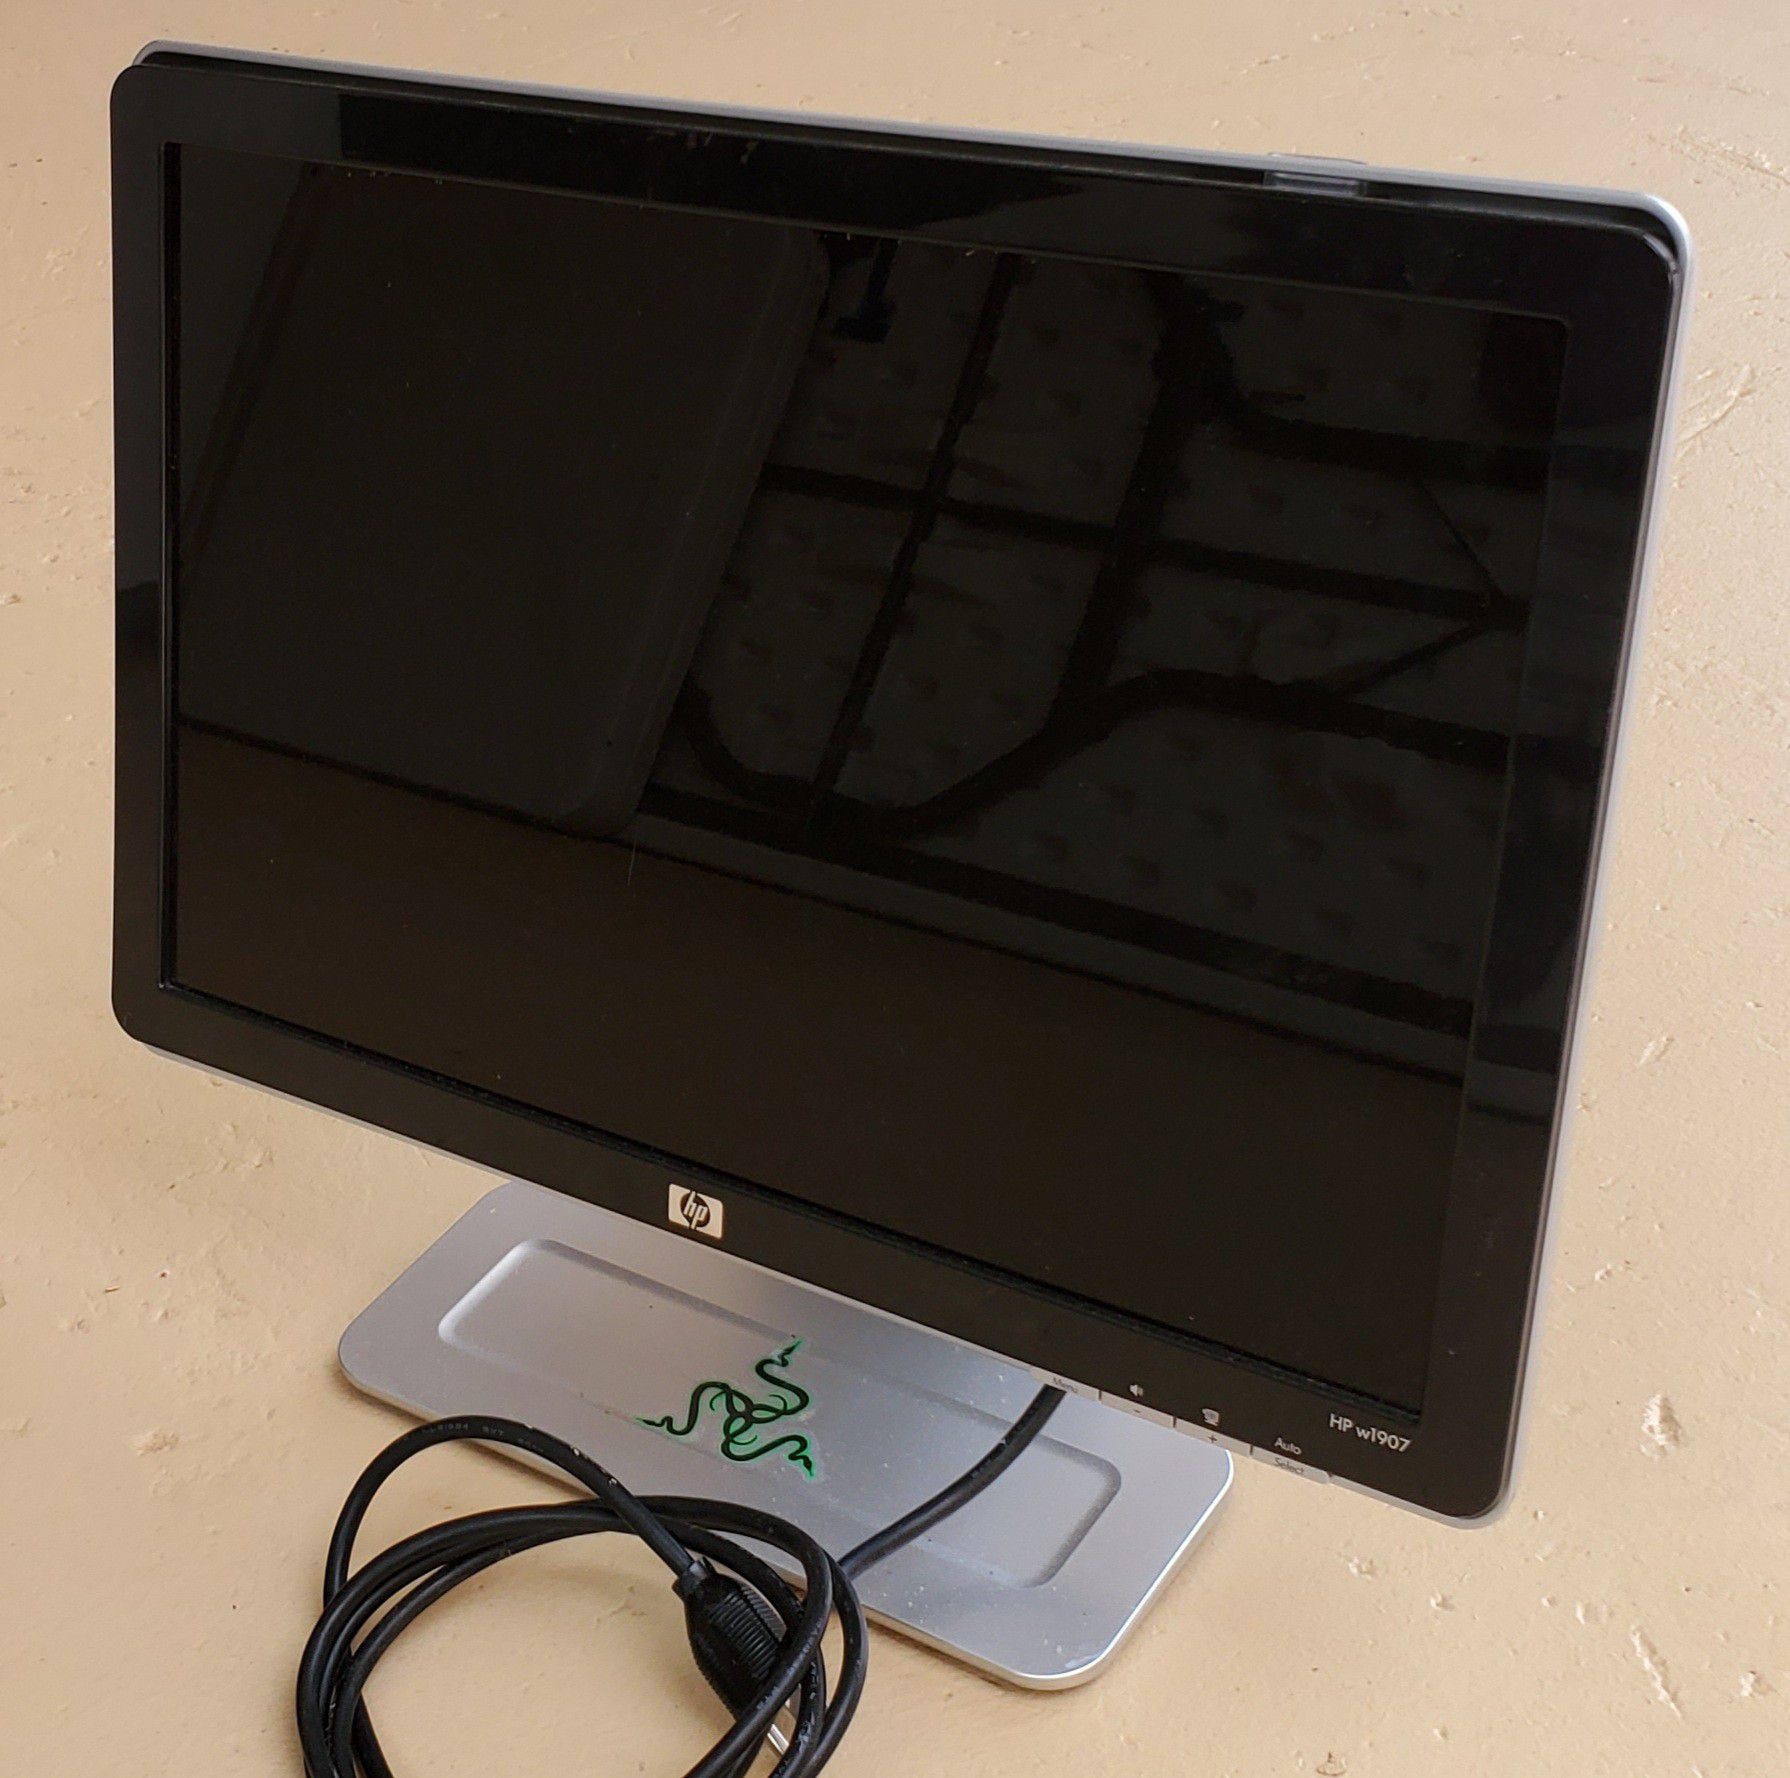 HP W1907 19-inch Computer Widescreen Flat Panel LCD Monitor